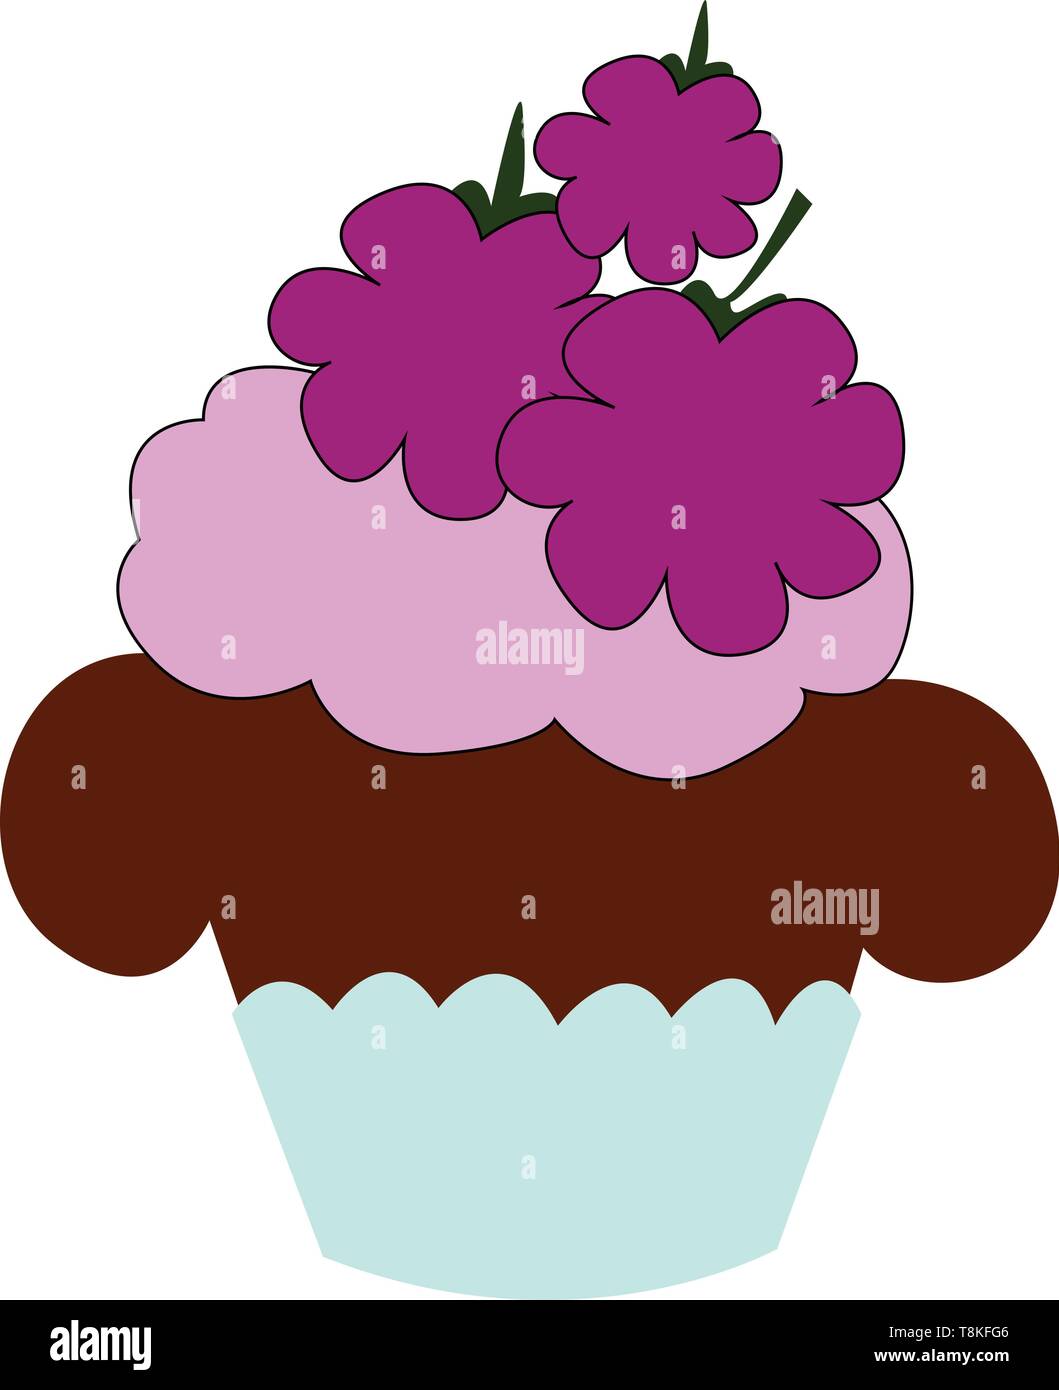 It is the cake made using the blackberries as one of the major ingredients., vector, color drawing or illustration. Stock Vector